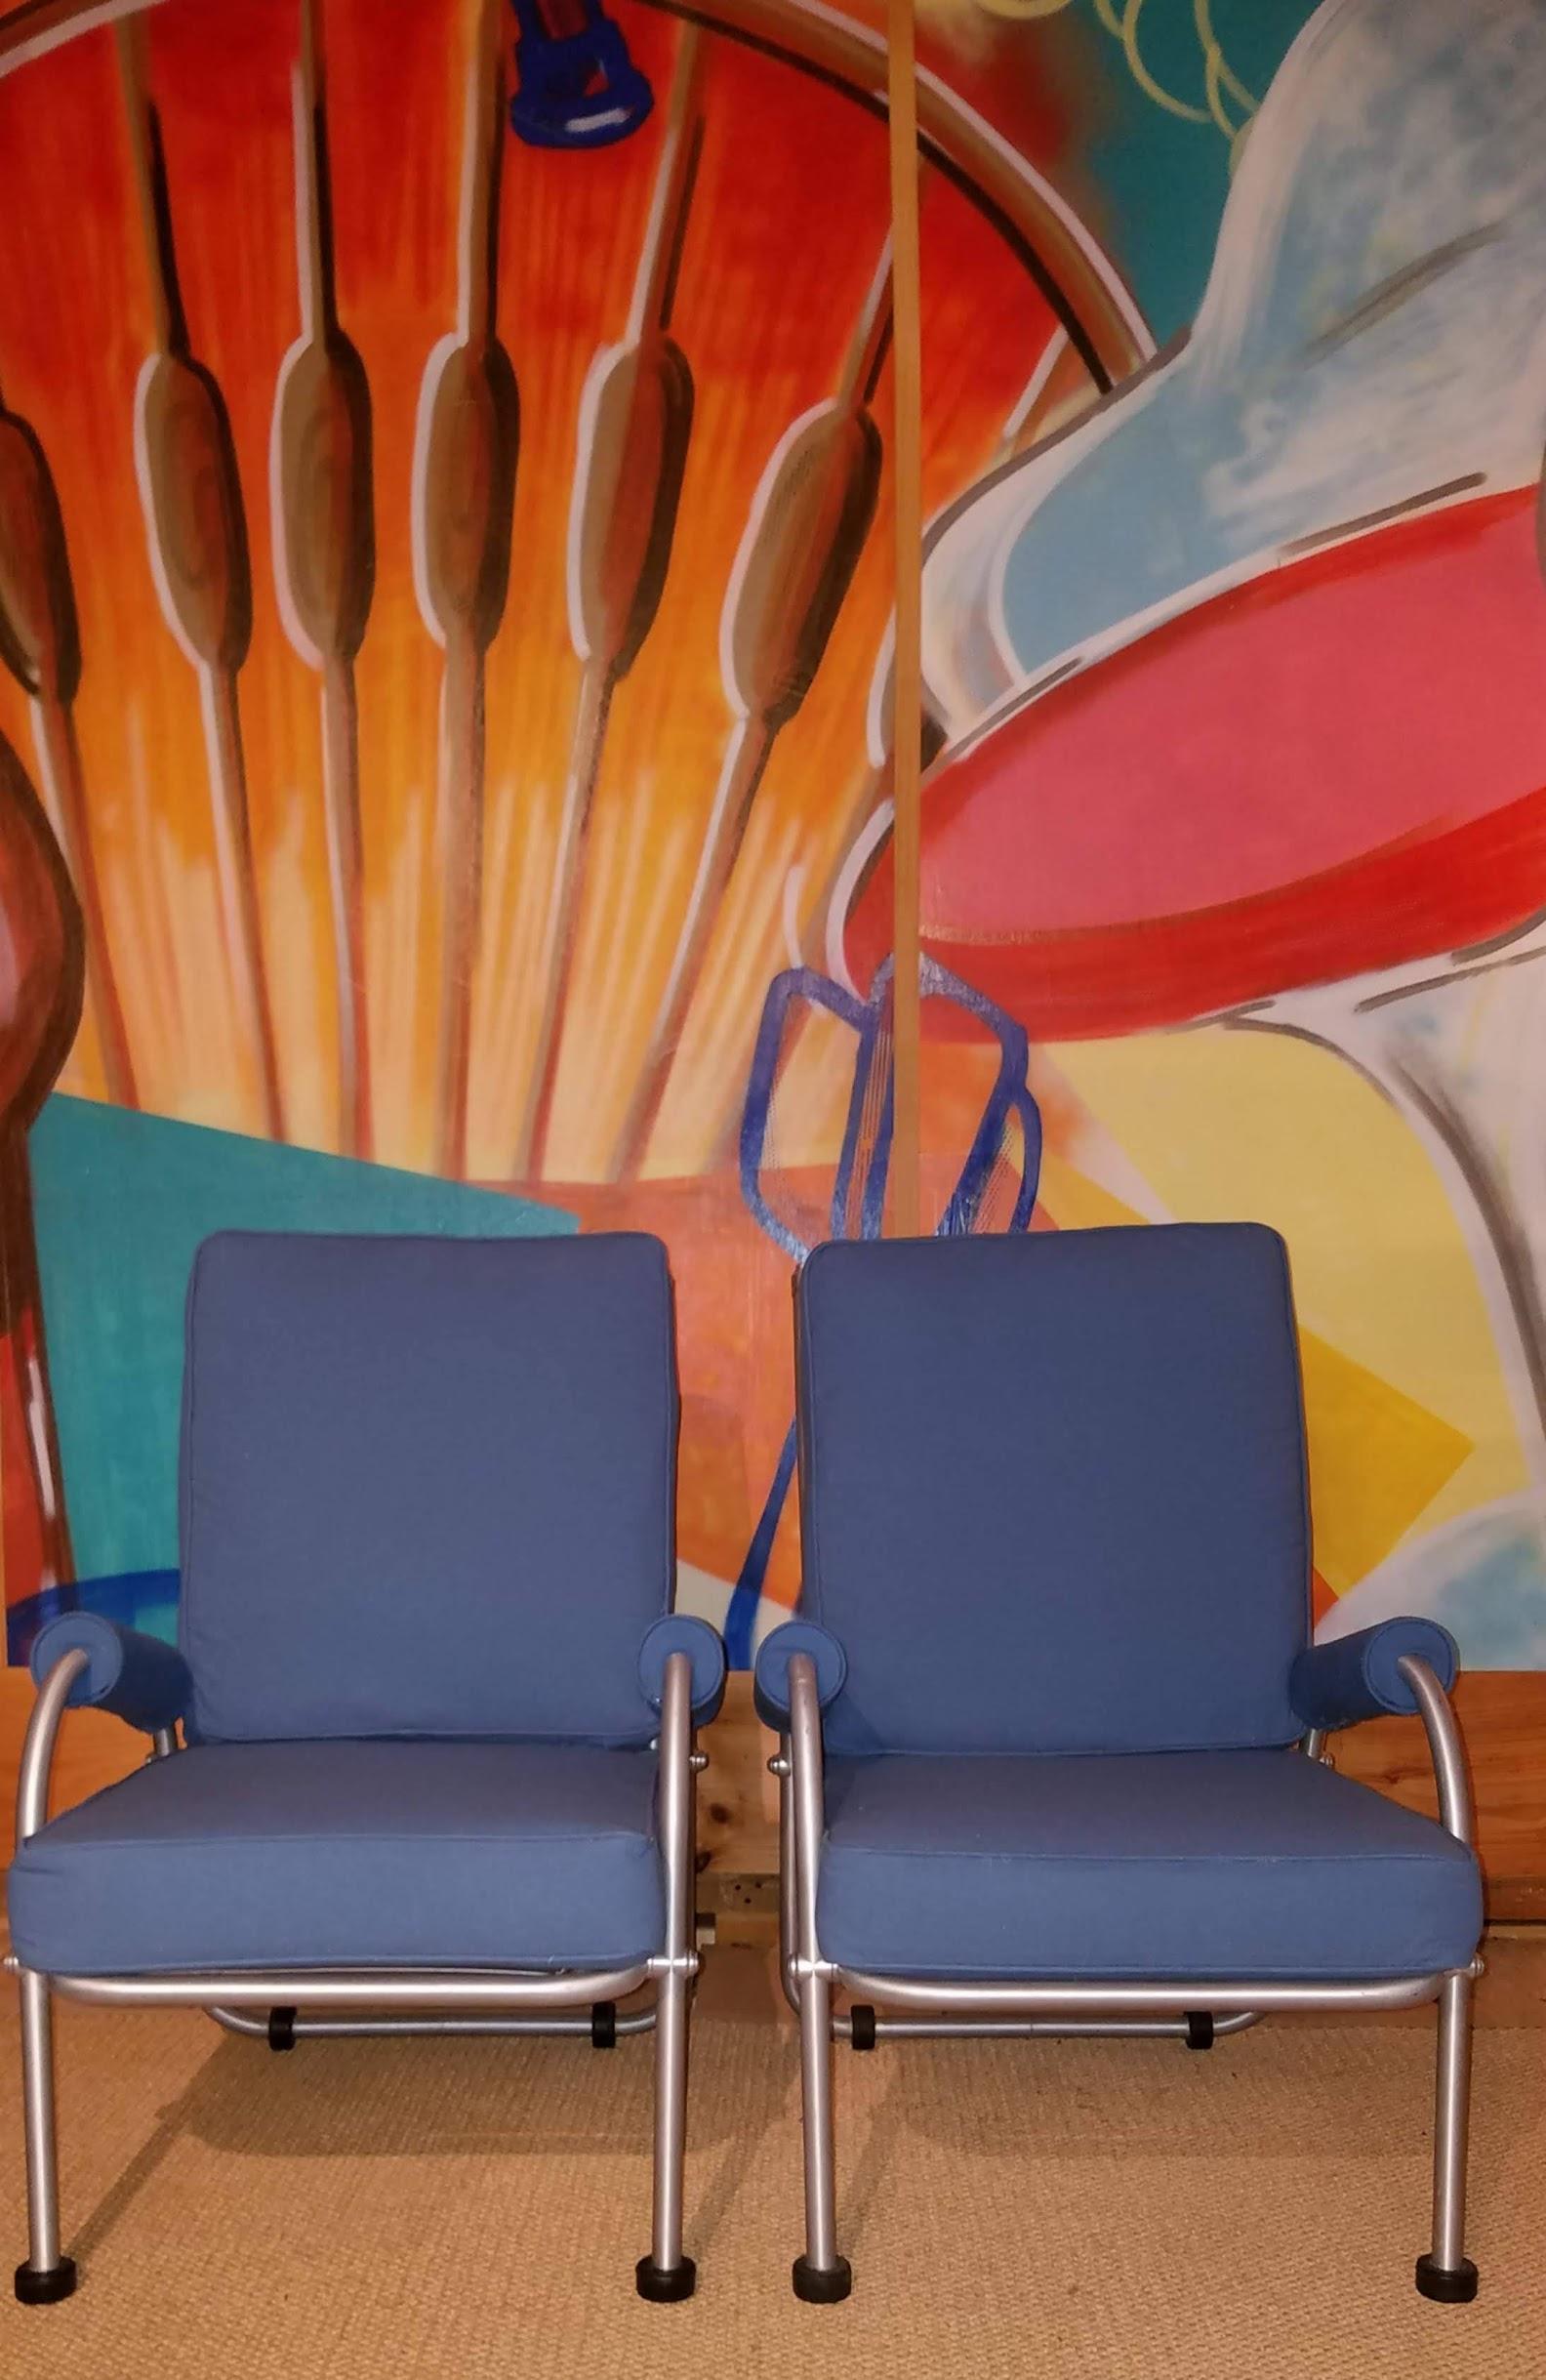 Warren McArthur suite of four lounge chairs circa late 1930s. These seldom seen examples retain their original finish to their tubular aluminum frames. They have been newly upholstered in a blue duck as originally offered by Warren McArthur and